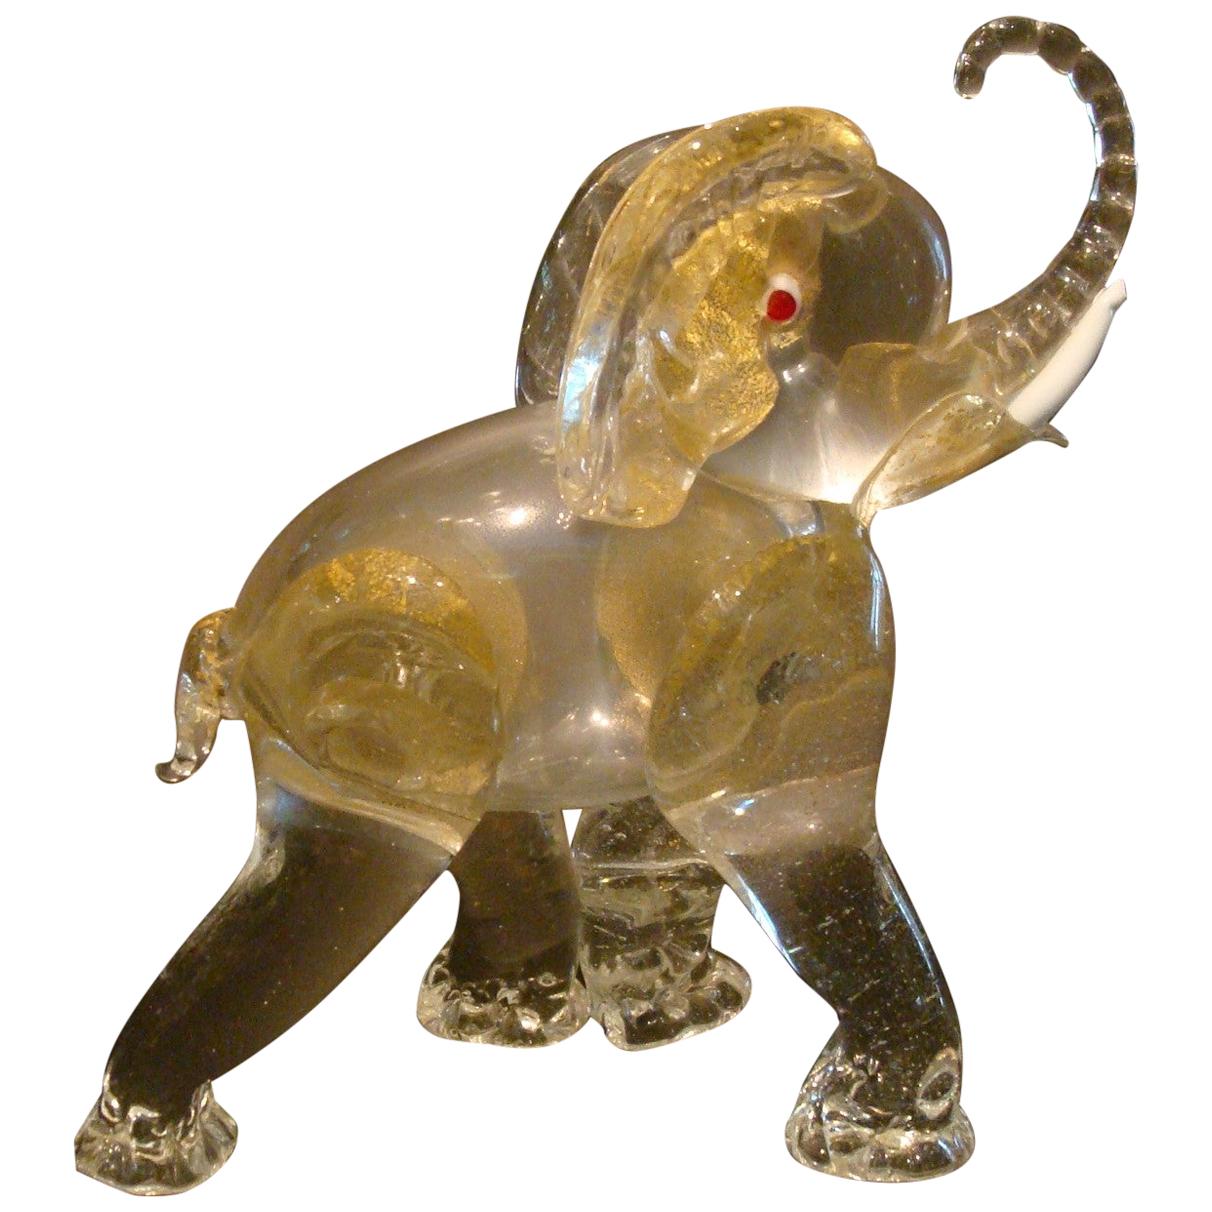 Midcentury Ercole Barovier Gold Glass Murano Elephant Sculpture, Italy, 1930s